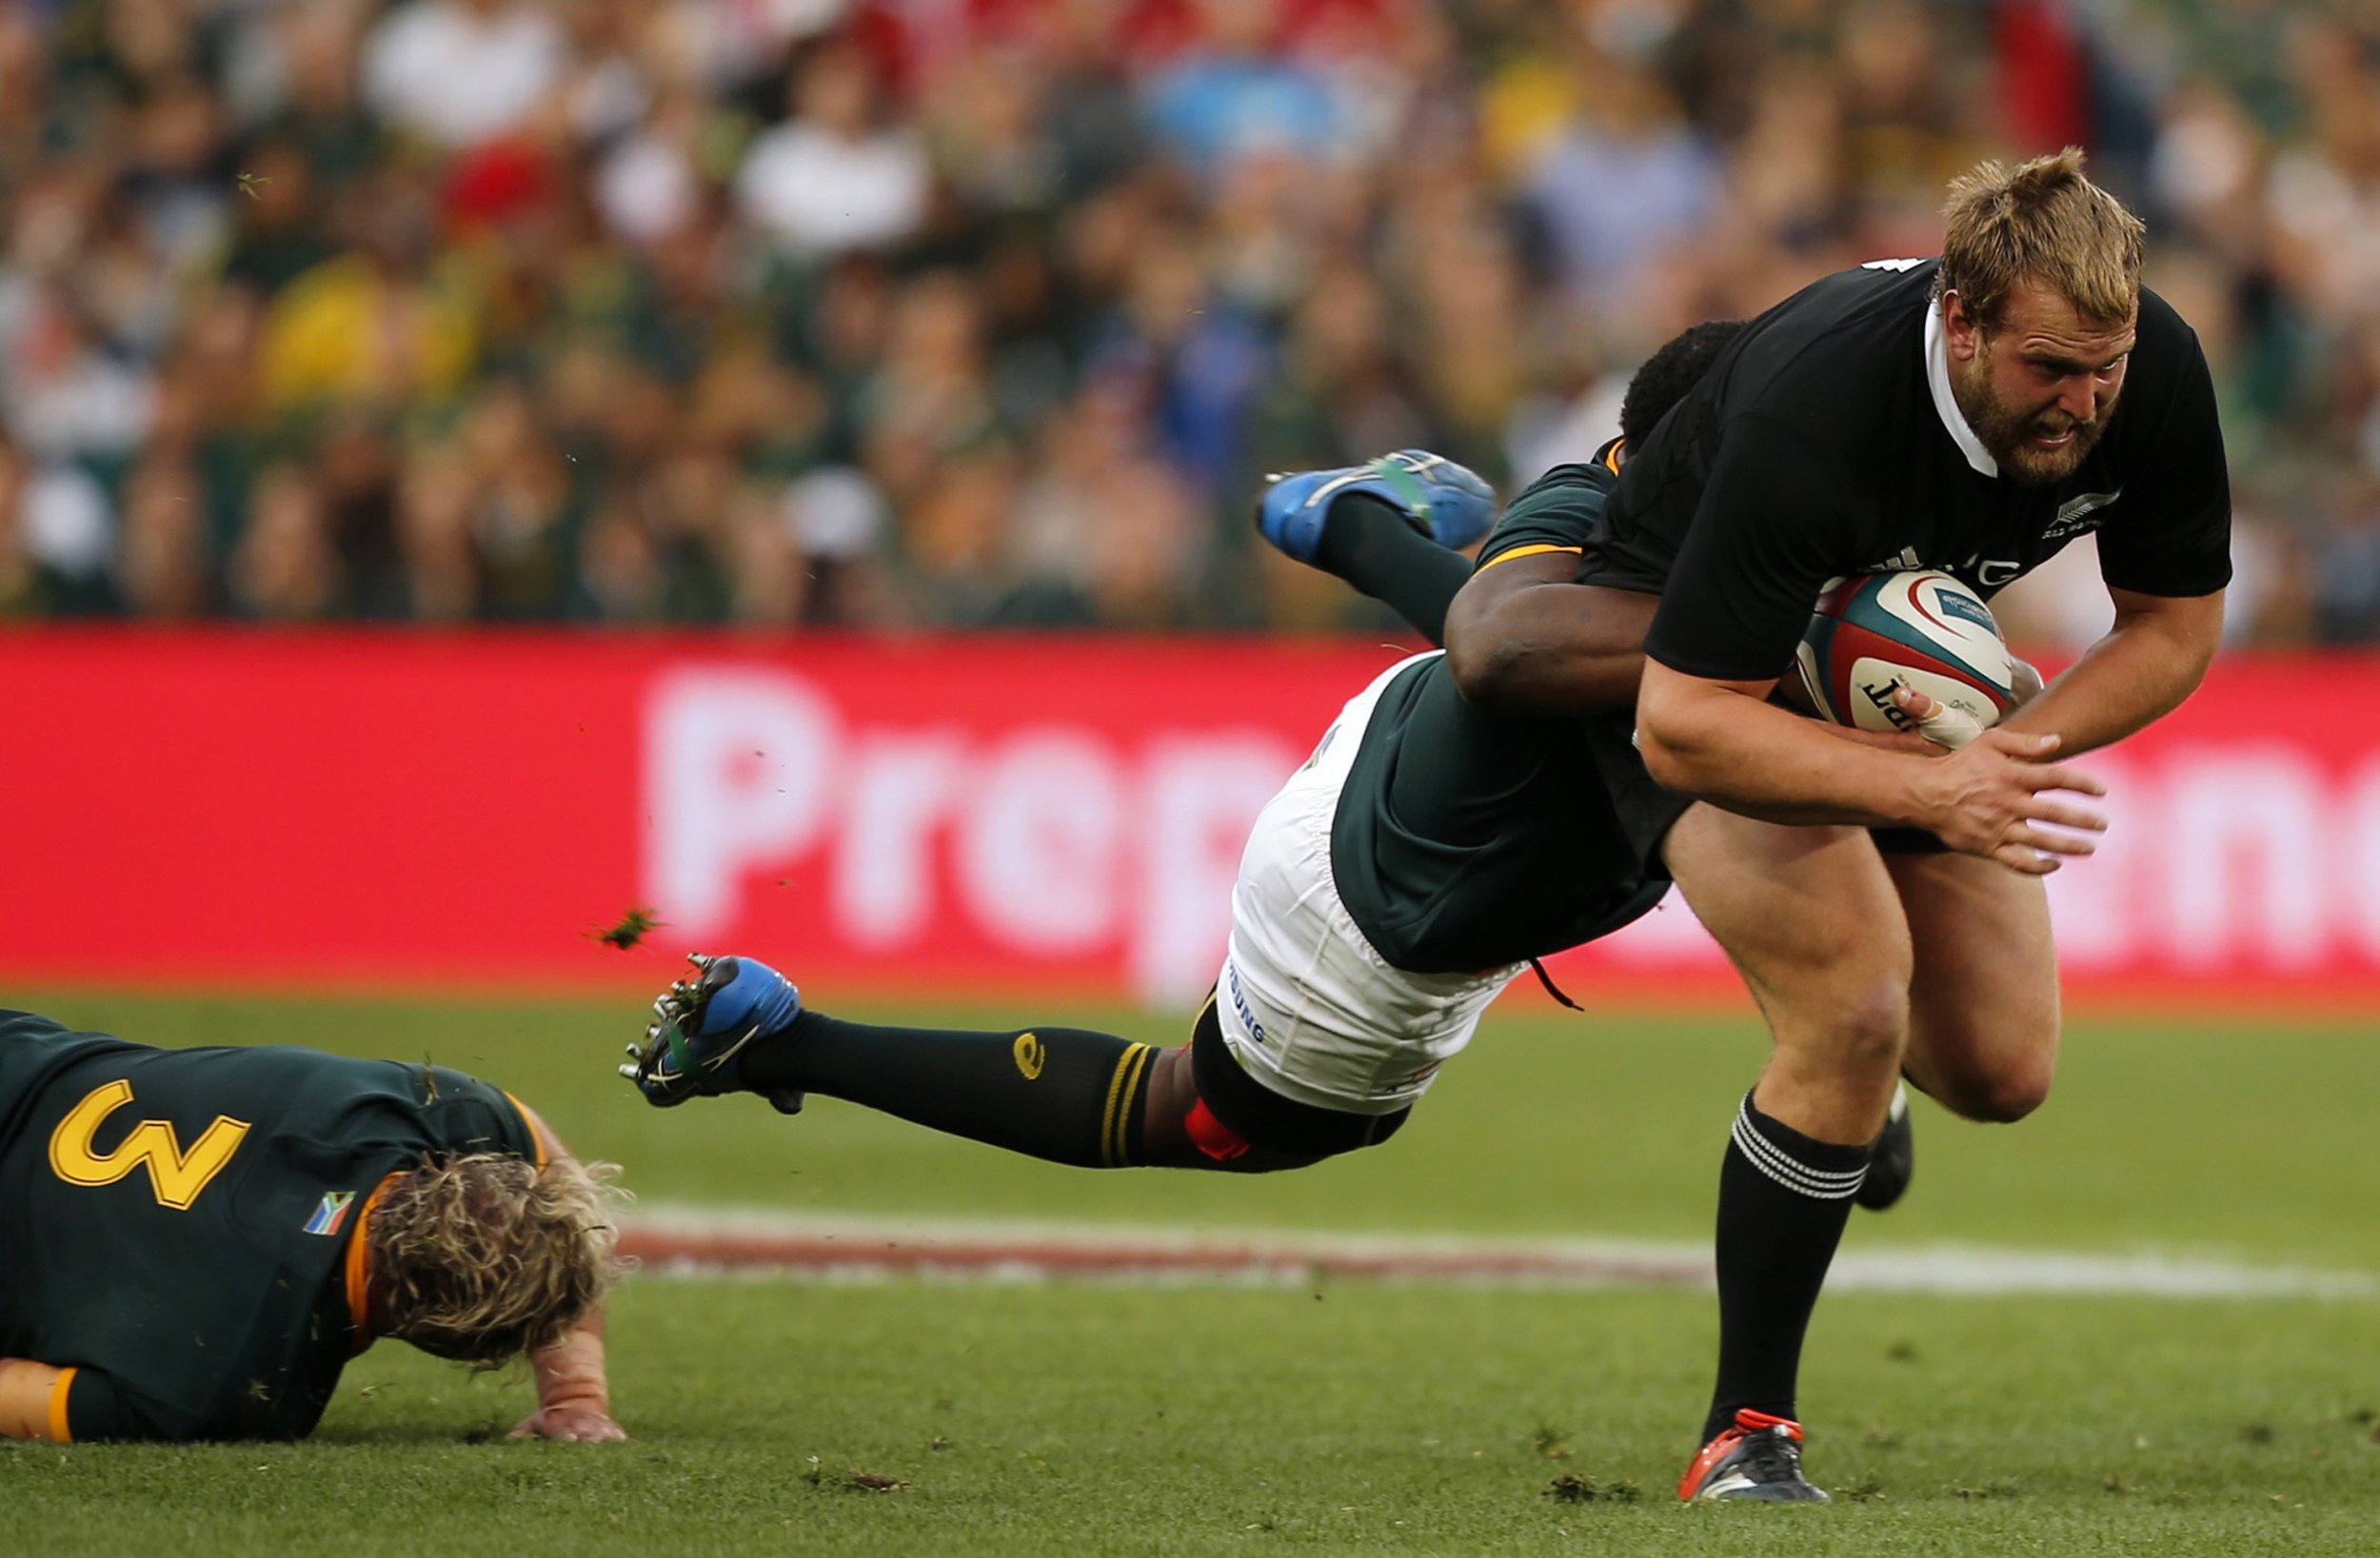 USA Vs. New Zealand Rugby 2014 Preview, TV Channel, Live Stream Info